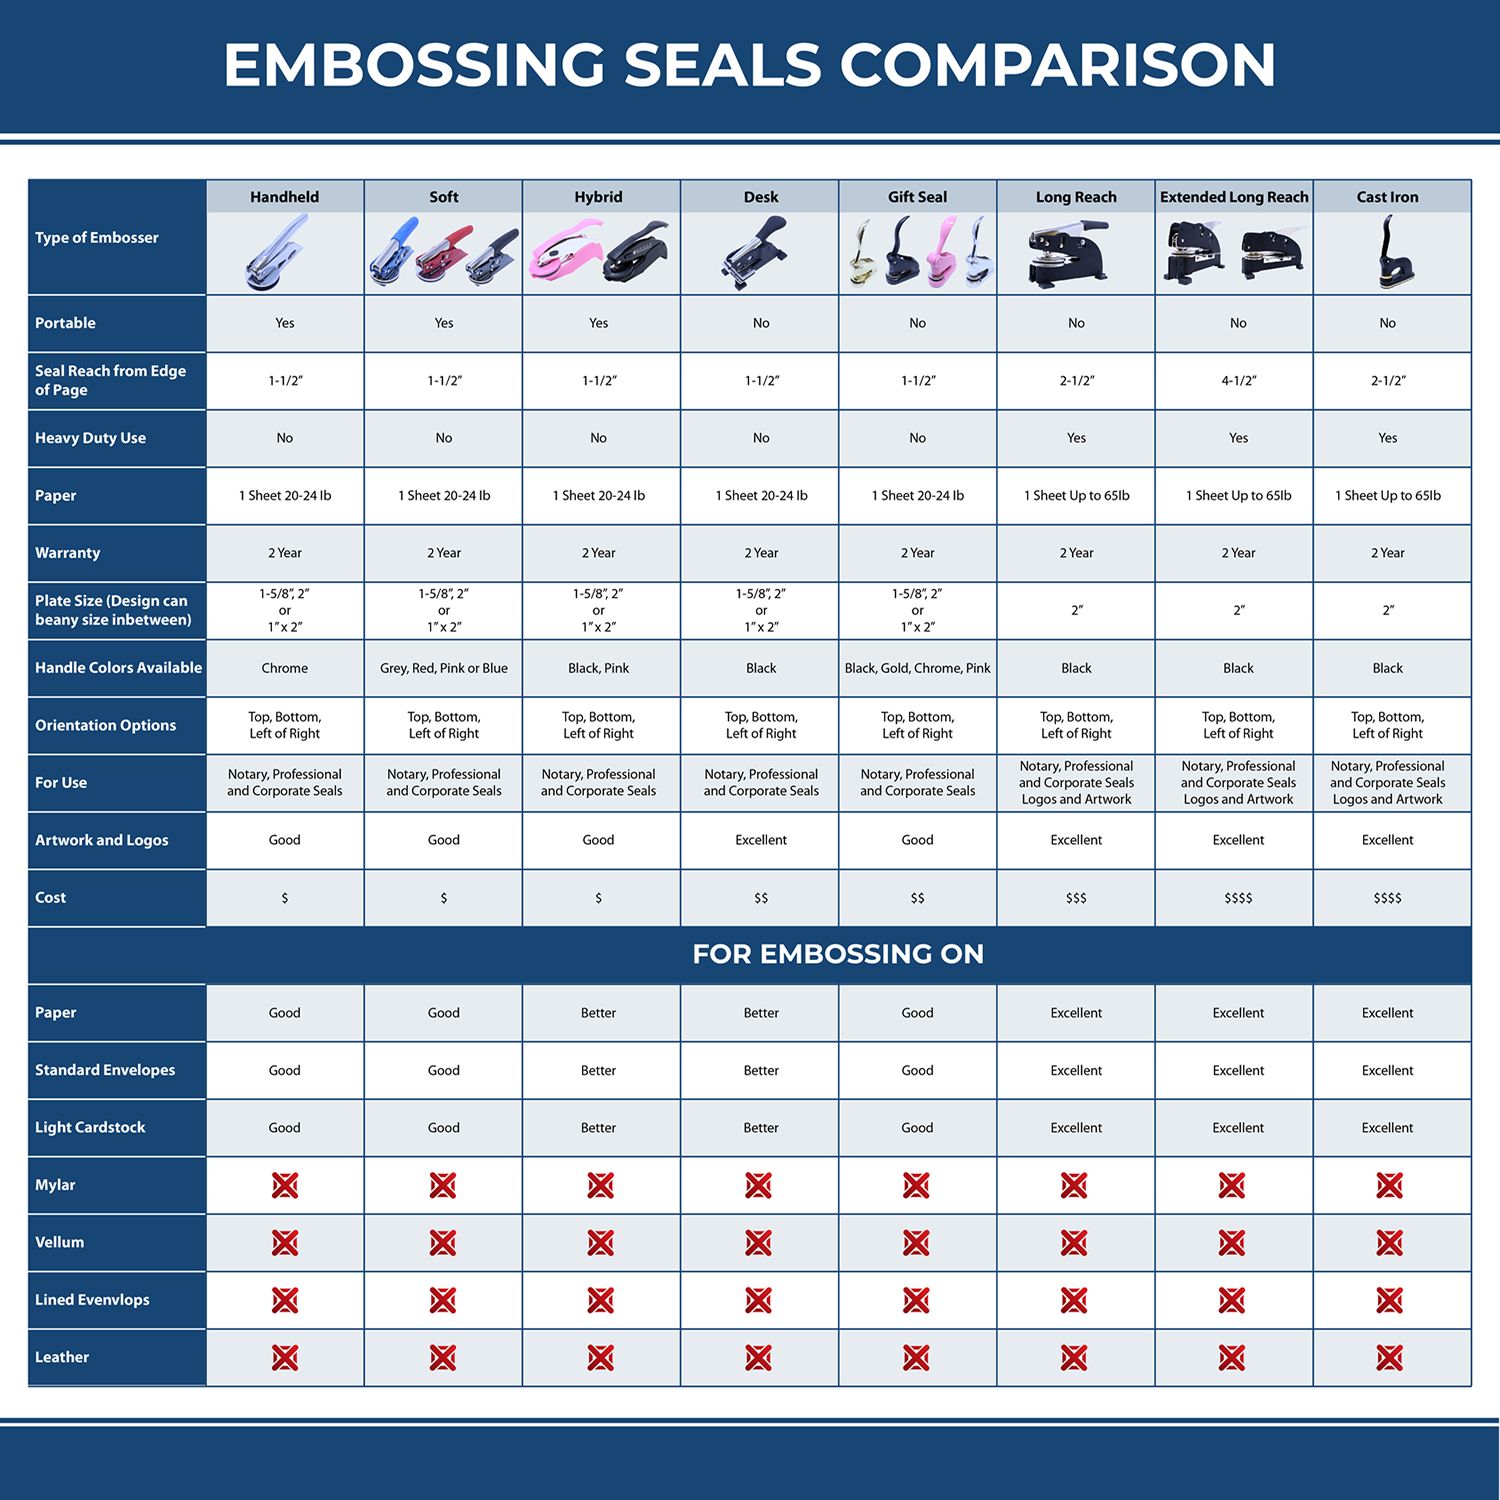 A comparison chart for the different types of mount models available for the New York Desk Surveyor Seal Embosser.